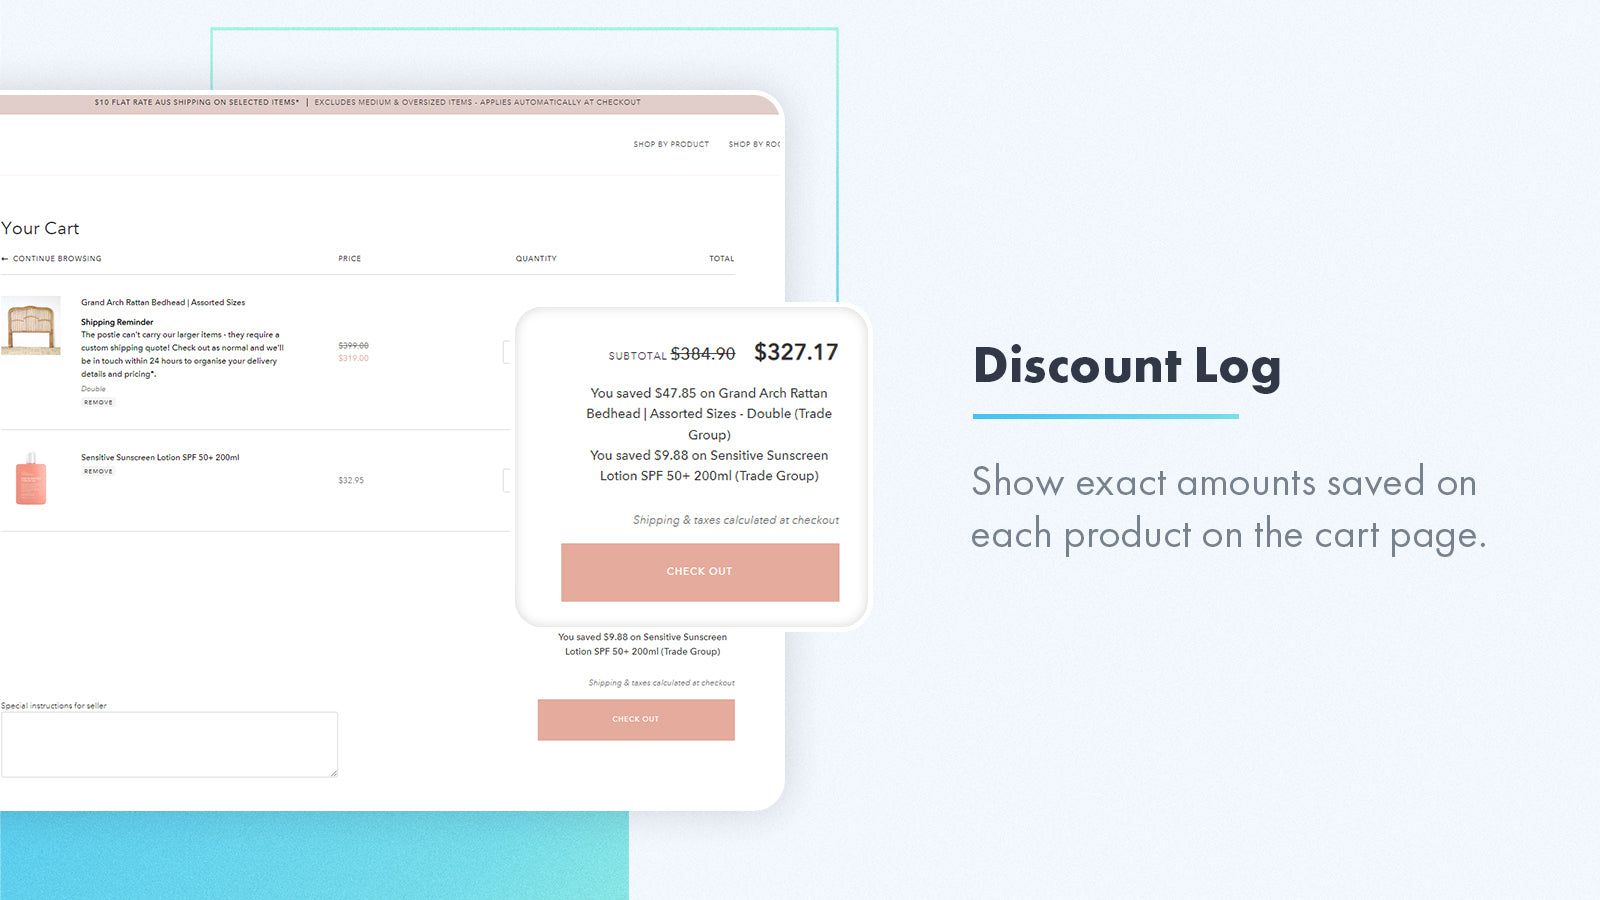 Automatically apply discounts like bonuses and breaks in cart